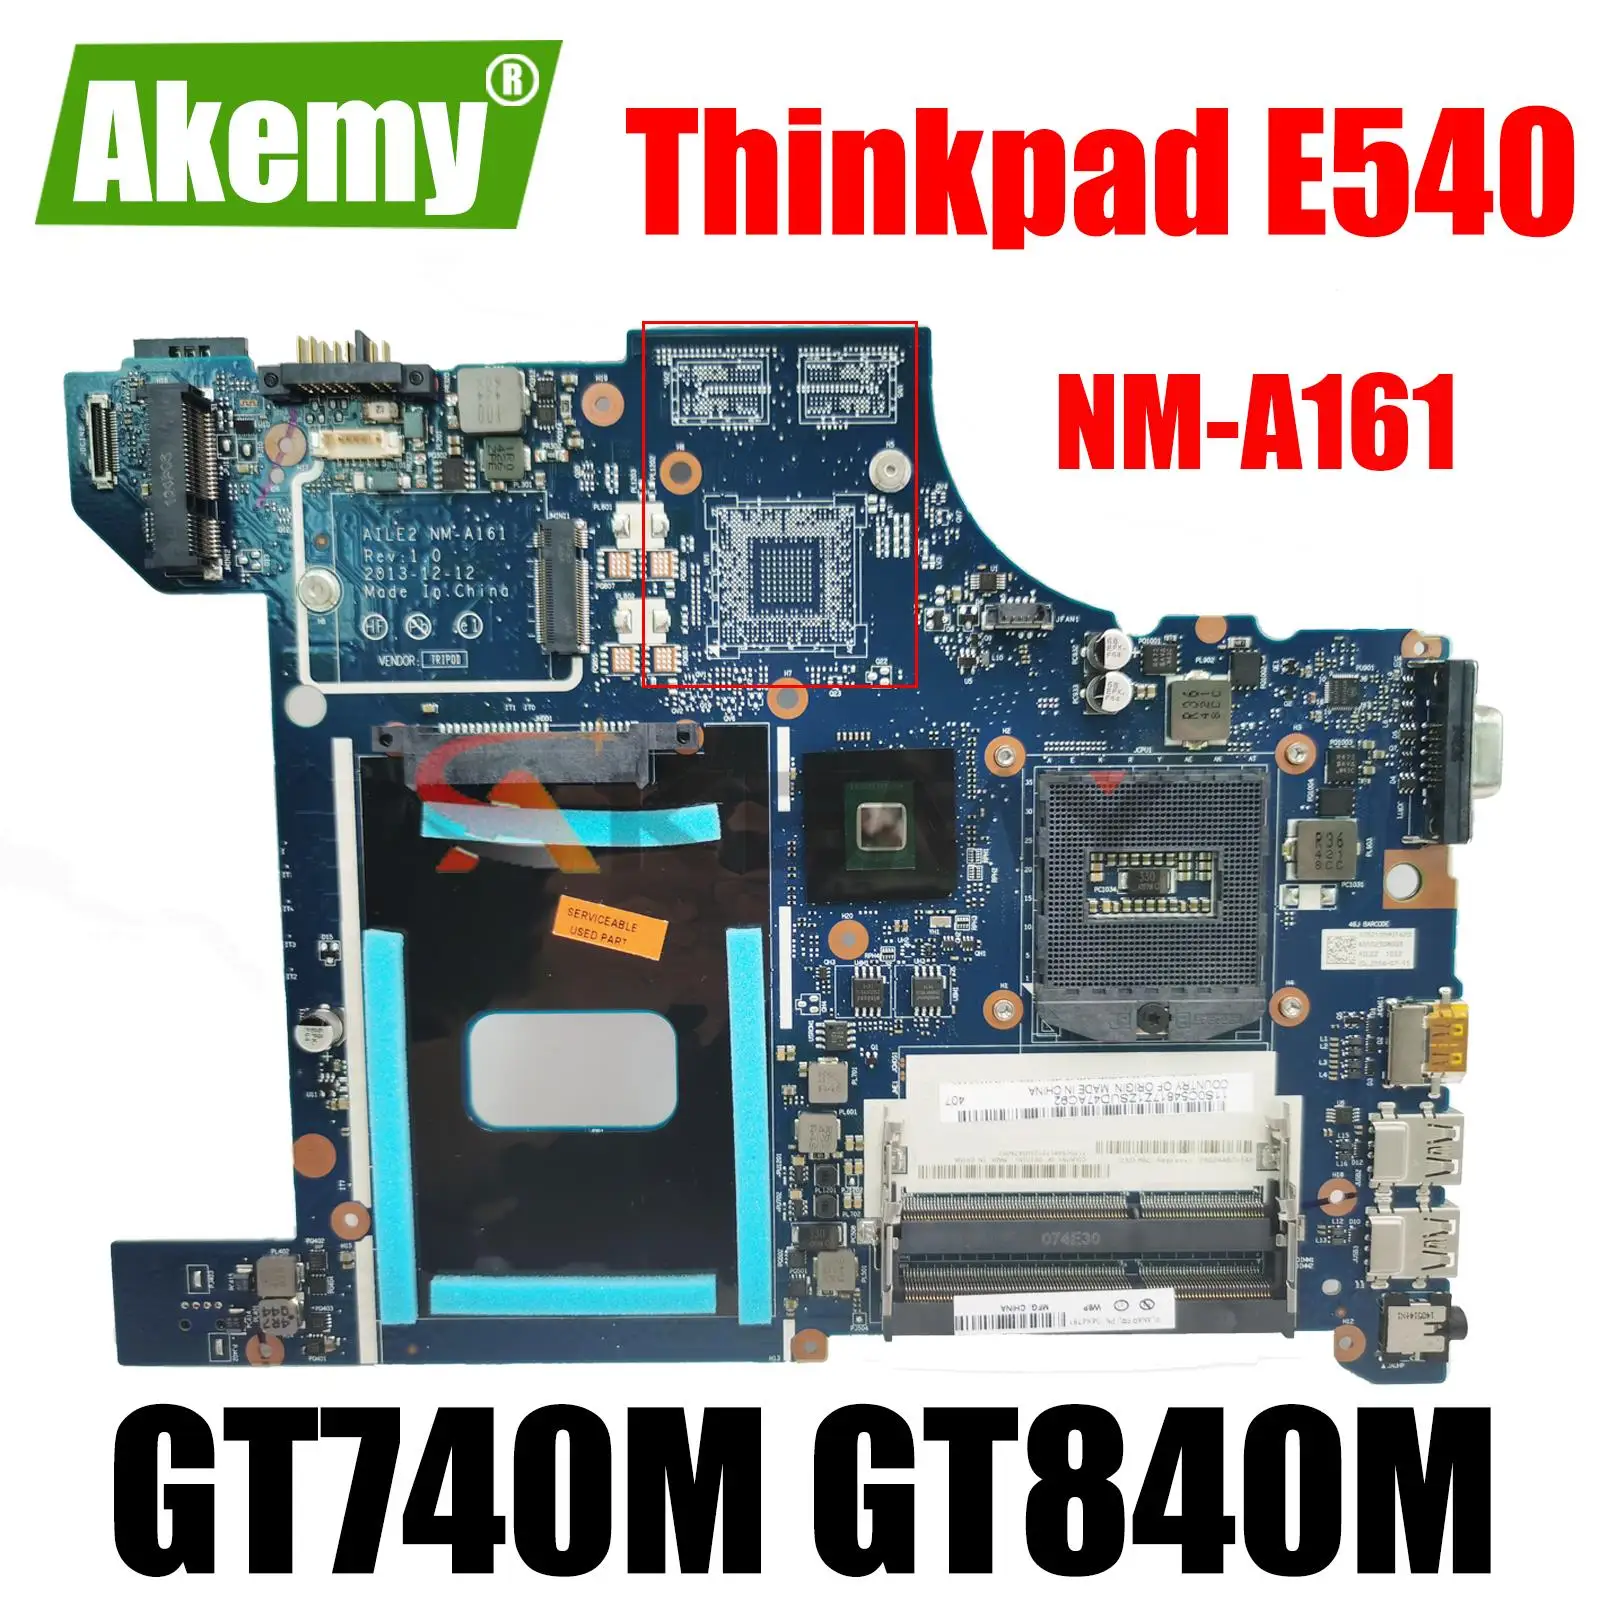 

NM-A161 For Lenovo ThinkPad E540 Notebook Motherboard GPU GT740/GT840M 2GB DDR3 100% Test work